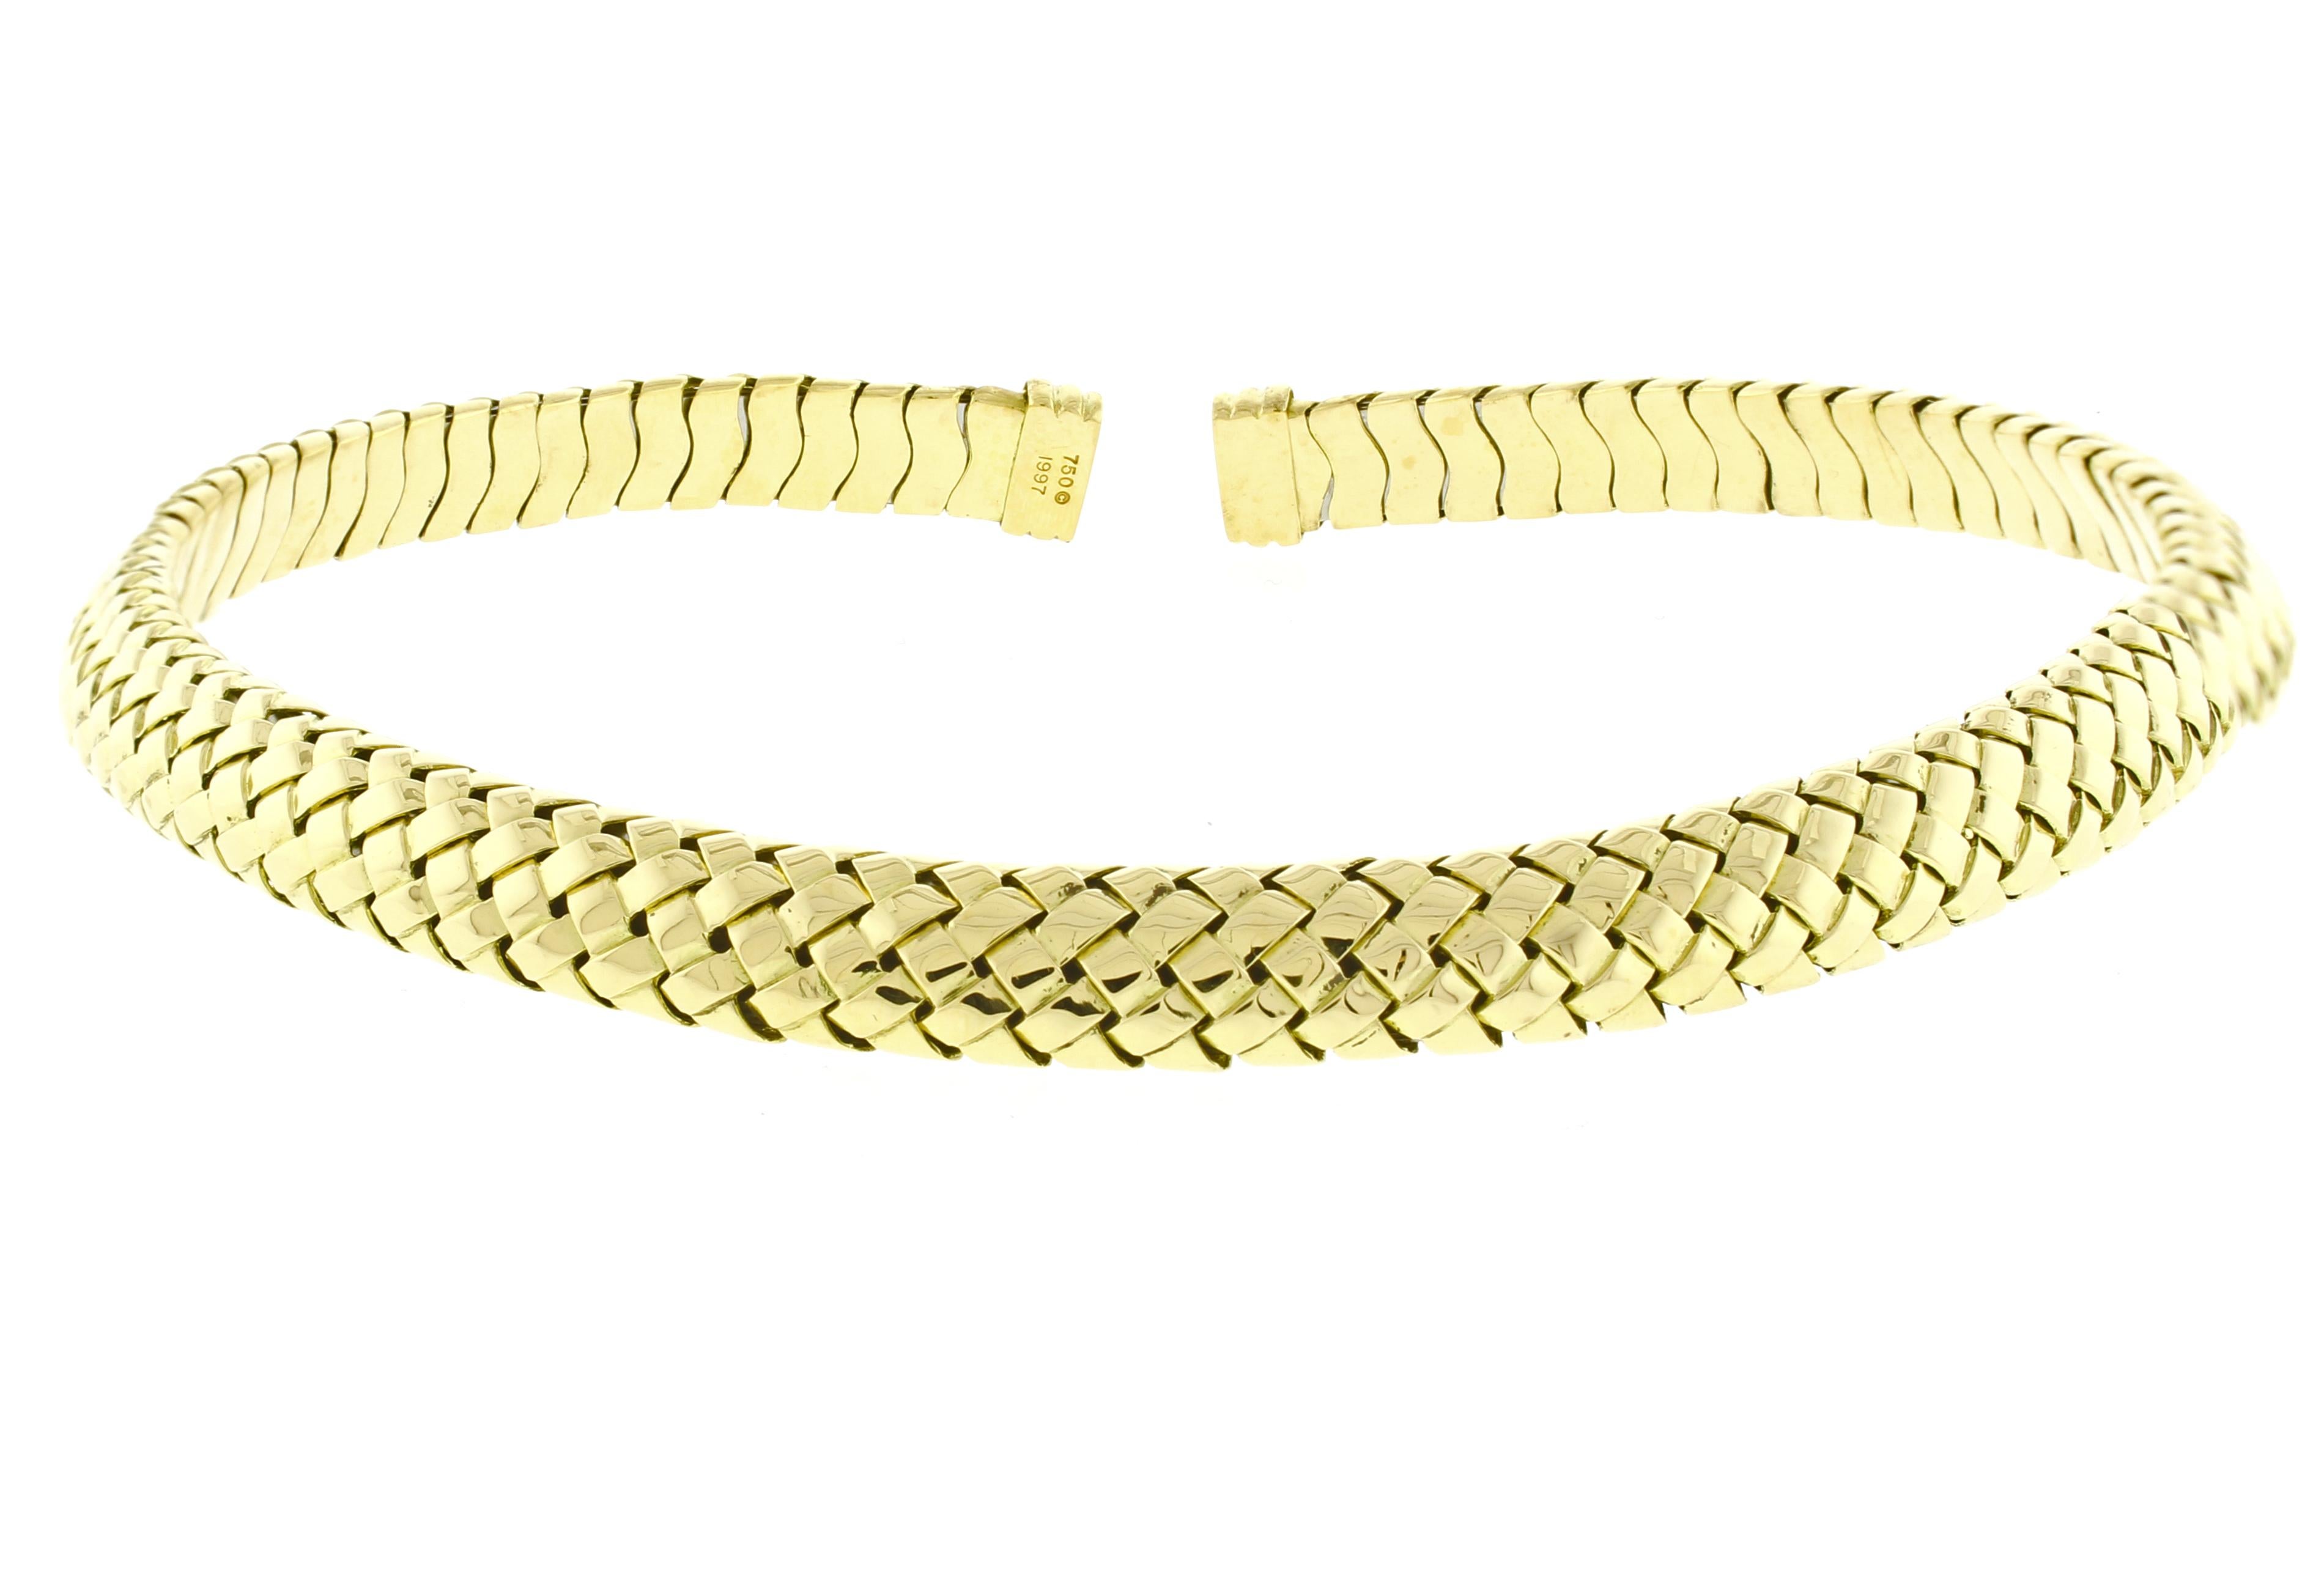 Tiffany Vannerie mesh 18 karat  gold woven necklace. Flexible opening to fit .
♦ Designer: Tiffany & Co.
♦ Metal: 18 karat
♦ Circa 2000
♦ 81.3grams
♦ 10 mm wide
♦ fits a 12-14 inch neck, average to slender
♦ Packaging: Pampillonia presentation box